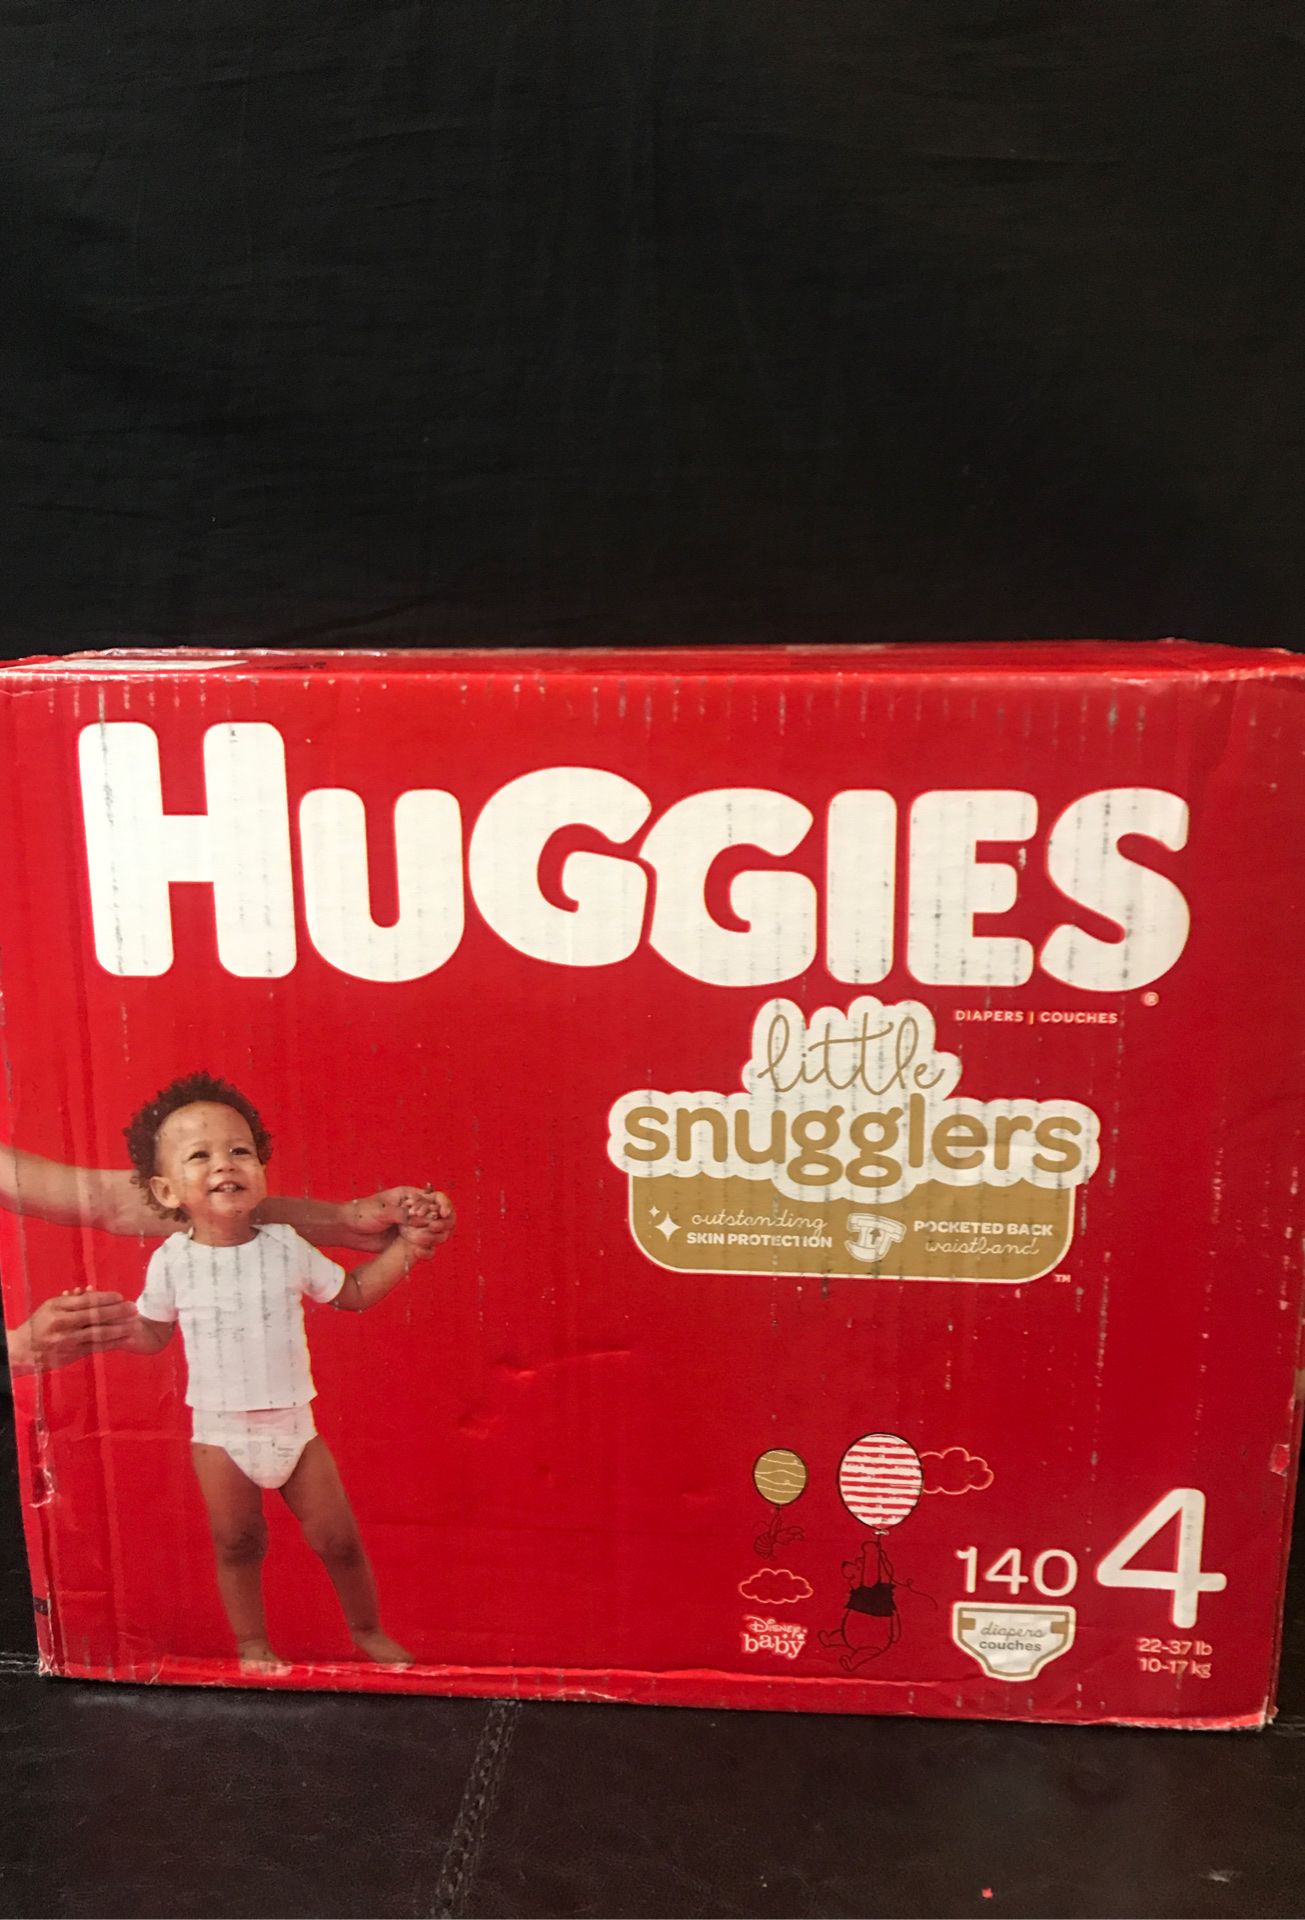 Huggies Little Snugglers. Baby Diapers Size 4 140 ct. One month Supply.